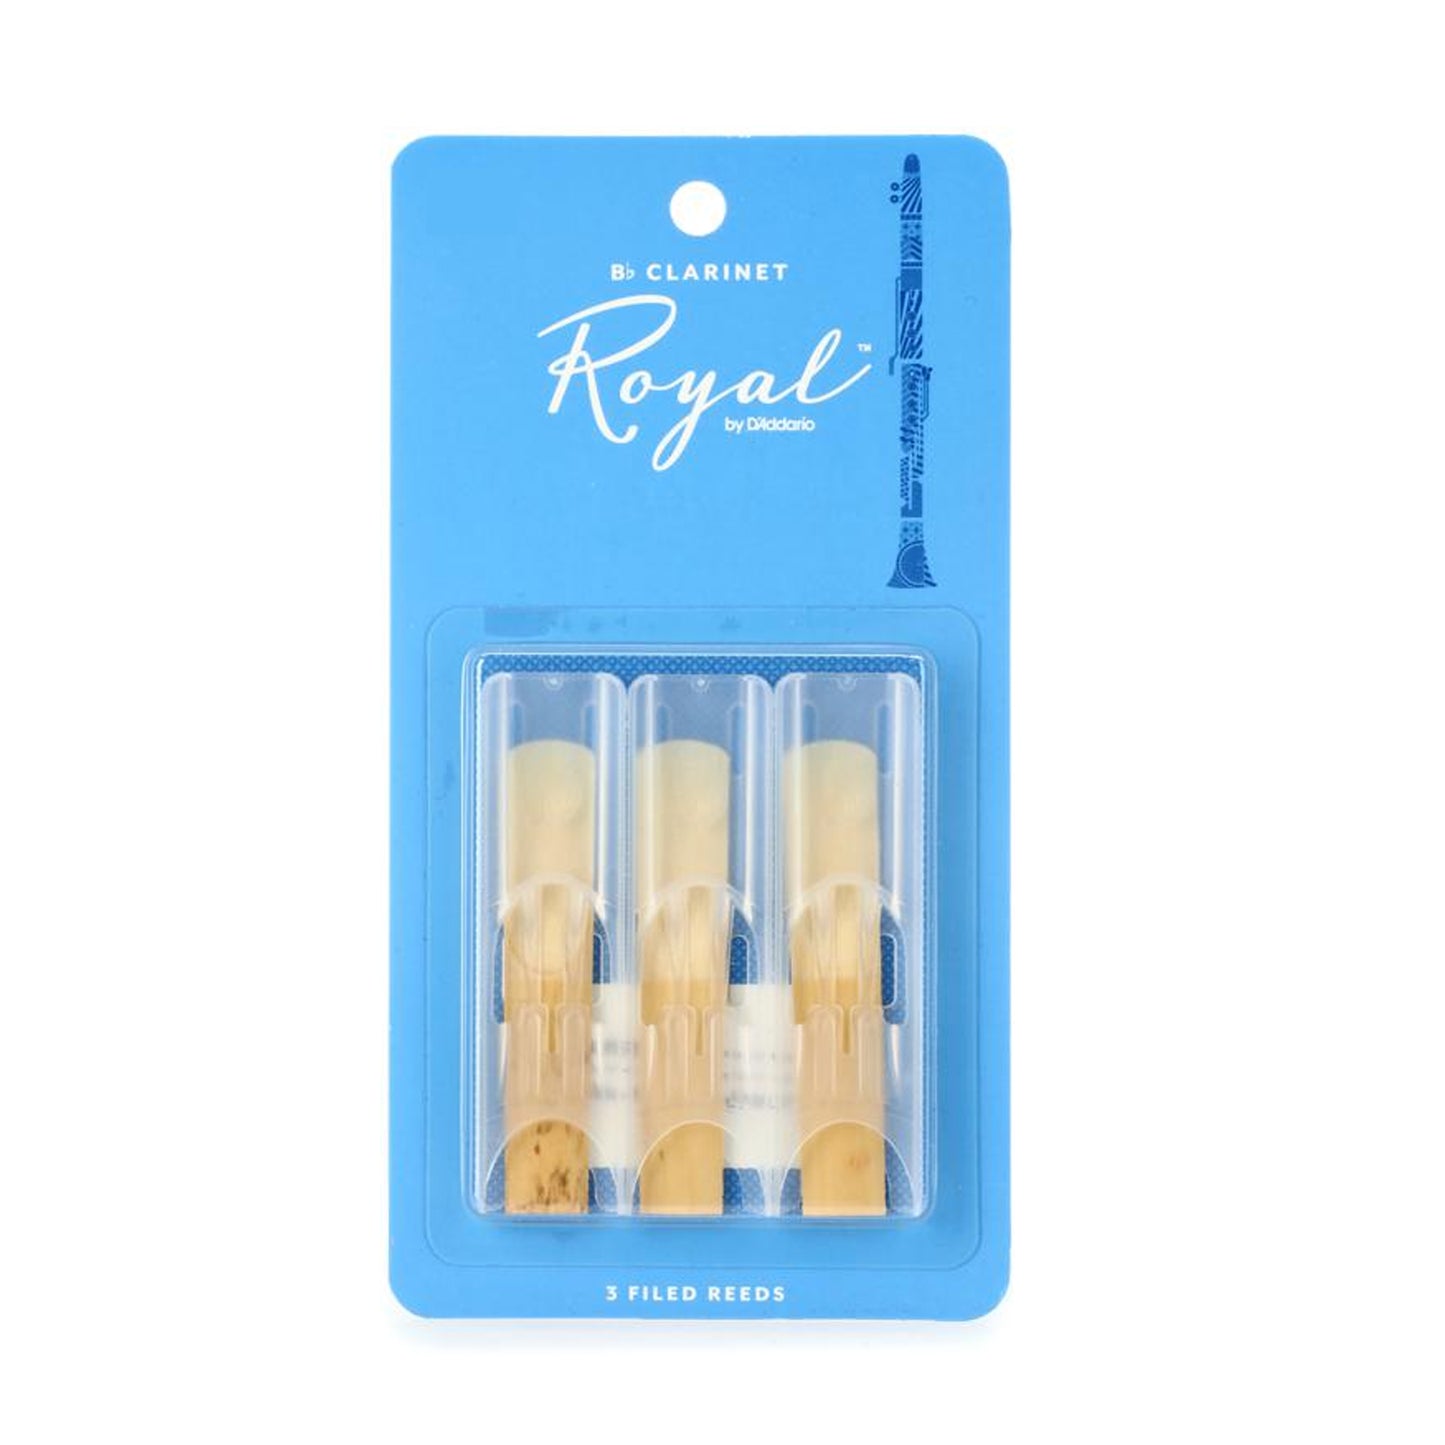 Royal Clarinet Reeds (Pack of 3)